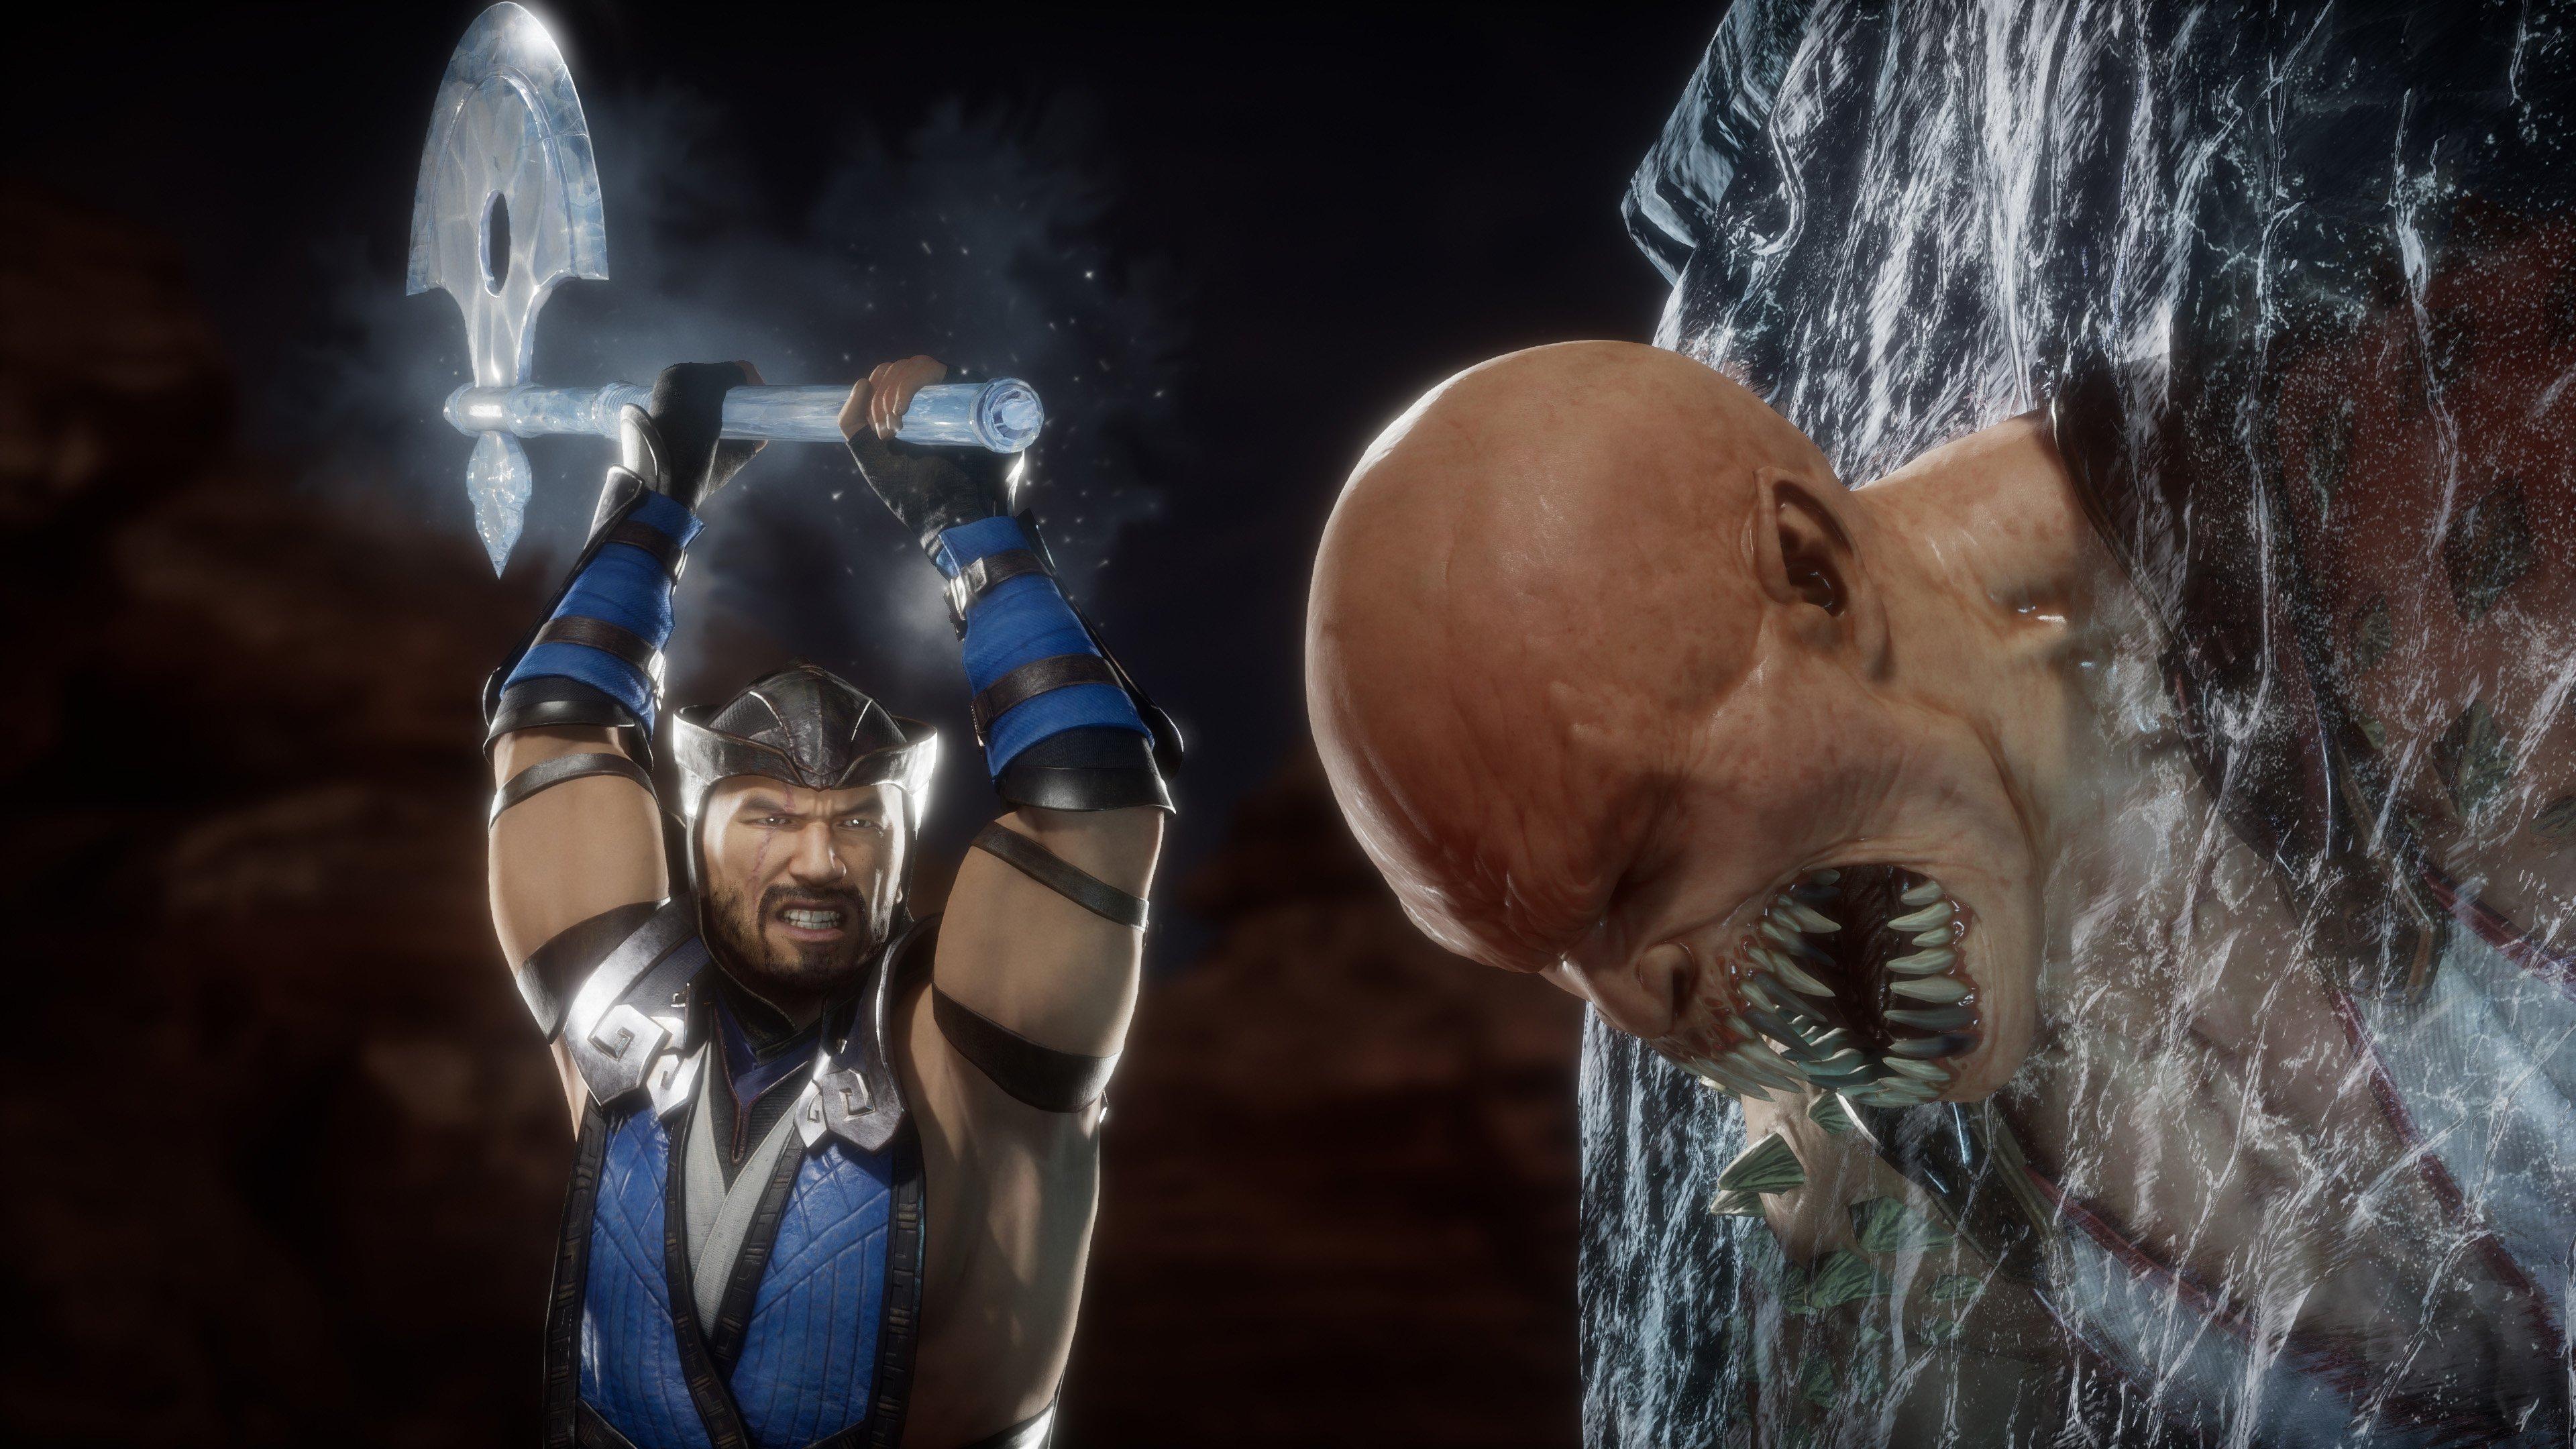 PlayStation on X: Baraka has seen major success in the MK11 Open Series  thanks to players like @datprostunner. Go beserk on the competition with  tips and tricks on every variation from @PNDKetchup